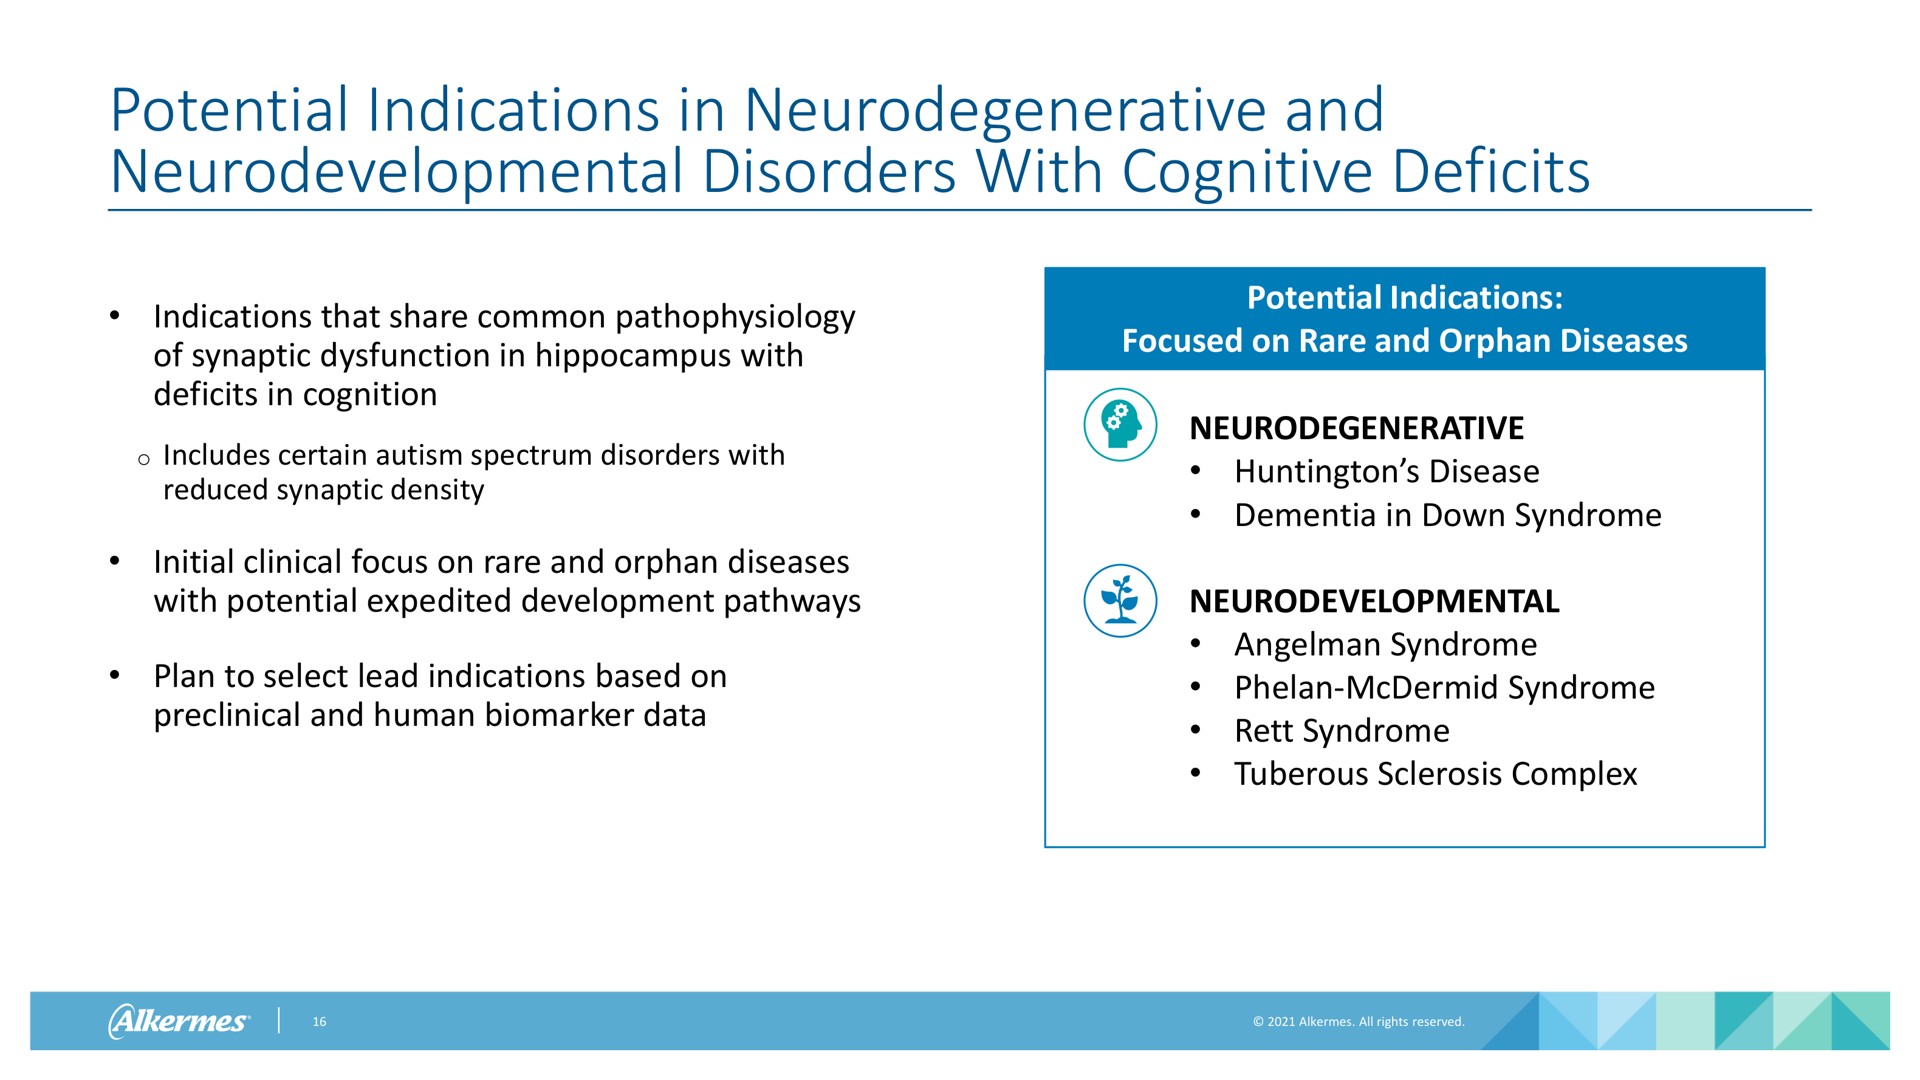 potential indications in neurodegenerative and disorders with cognitive deficits indications that share common of synaptic dysfunction in hippocampus with deficits in cognition includes certain autism spectrum disorders with reduced synaptic density initial clinical focus on rare and orphan diseases with potential expedited development pathways plan to select lead indications based on preclinical and human data potential indications focused on rare and orphan diseases neurodegenerative disease dementia in down syndrome syndrome syndrome syndrome tuberous sclerosis complex pay by | Alkermes